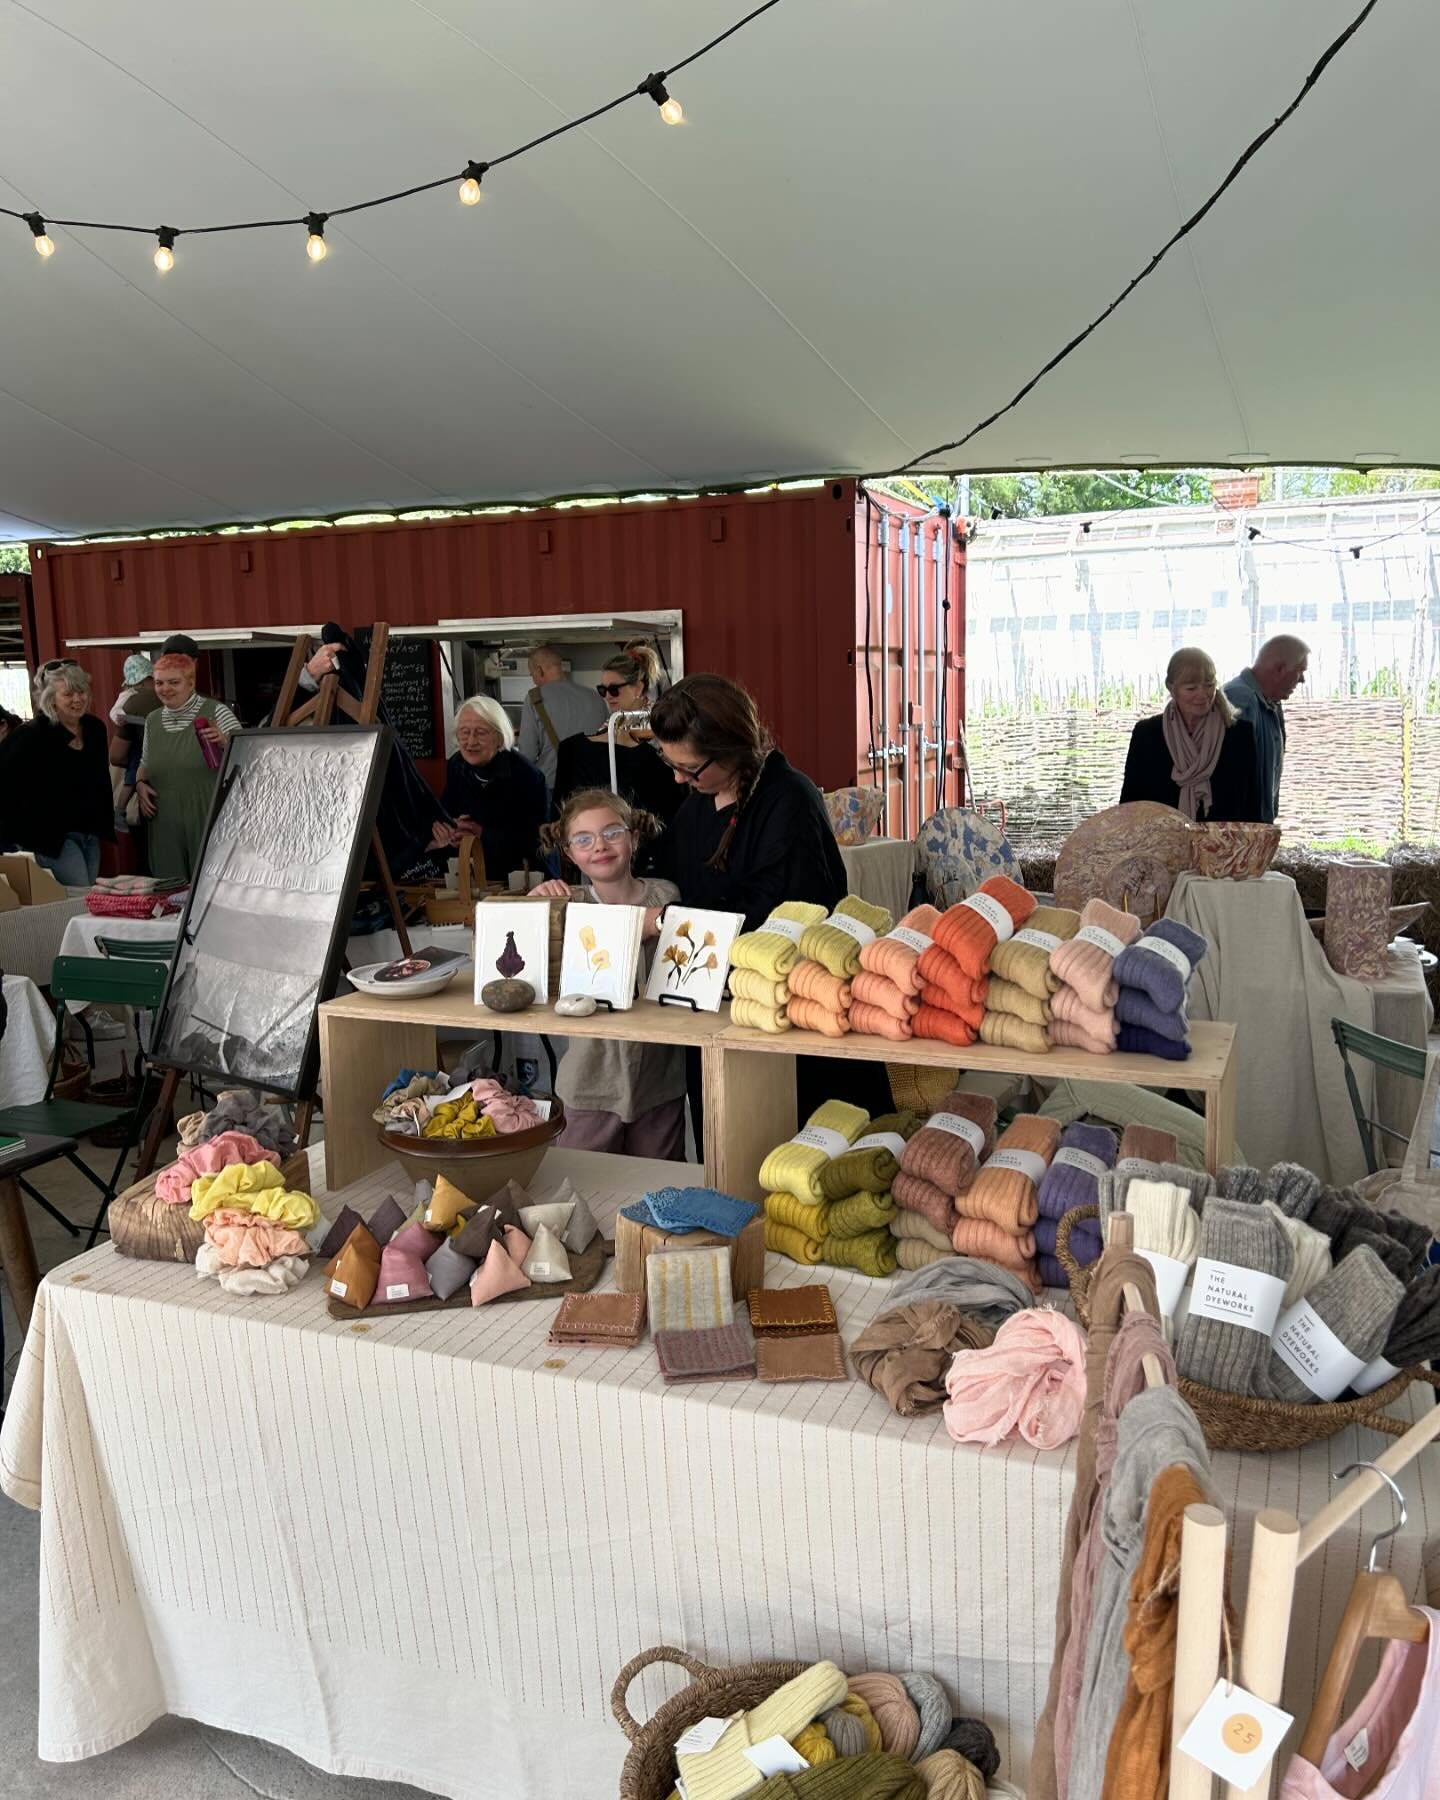 What a weekend!
The sun shone, the flowers were out, friendships were made, the lamb tails were wagging, flower crowns bounced.

The atmosphere at this very special fair was utterly brilliant and people&rsquo;s show of love and enthusiasm for small, 